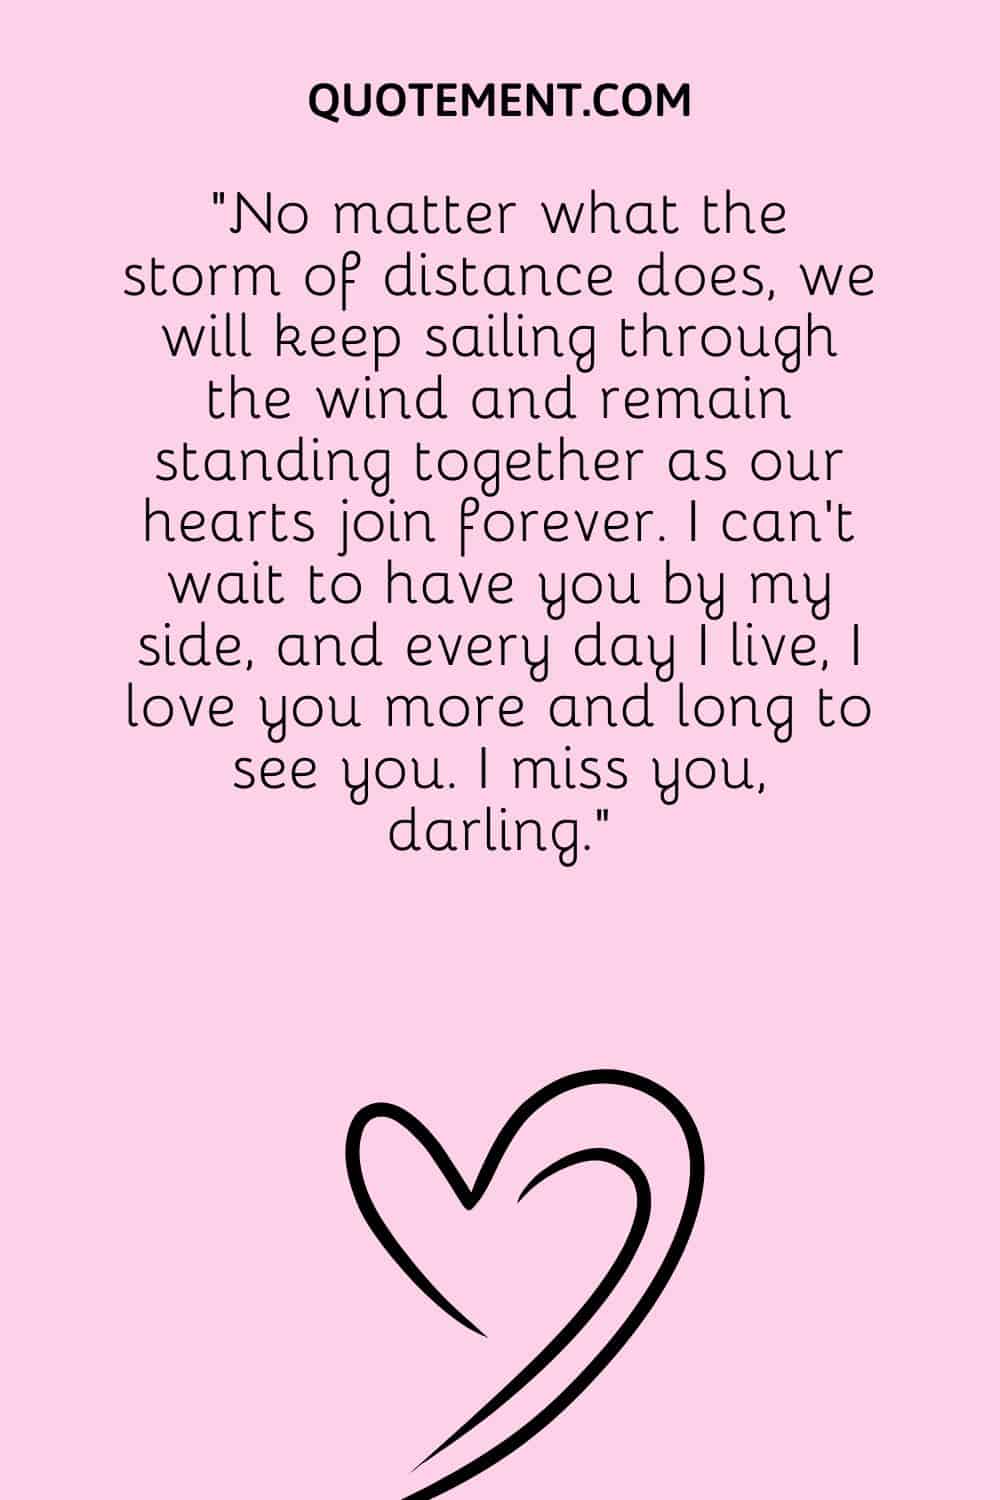 No matter what the storm of distance does, we will keep sailing